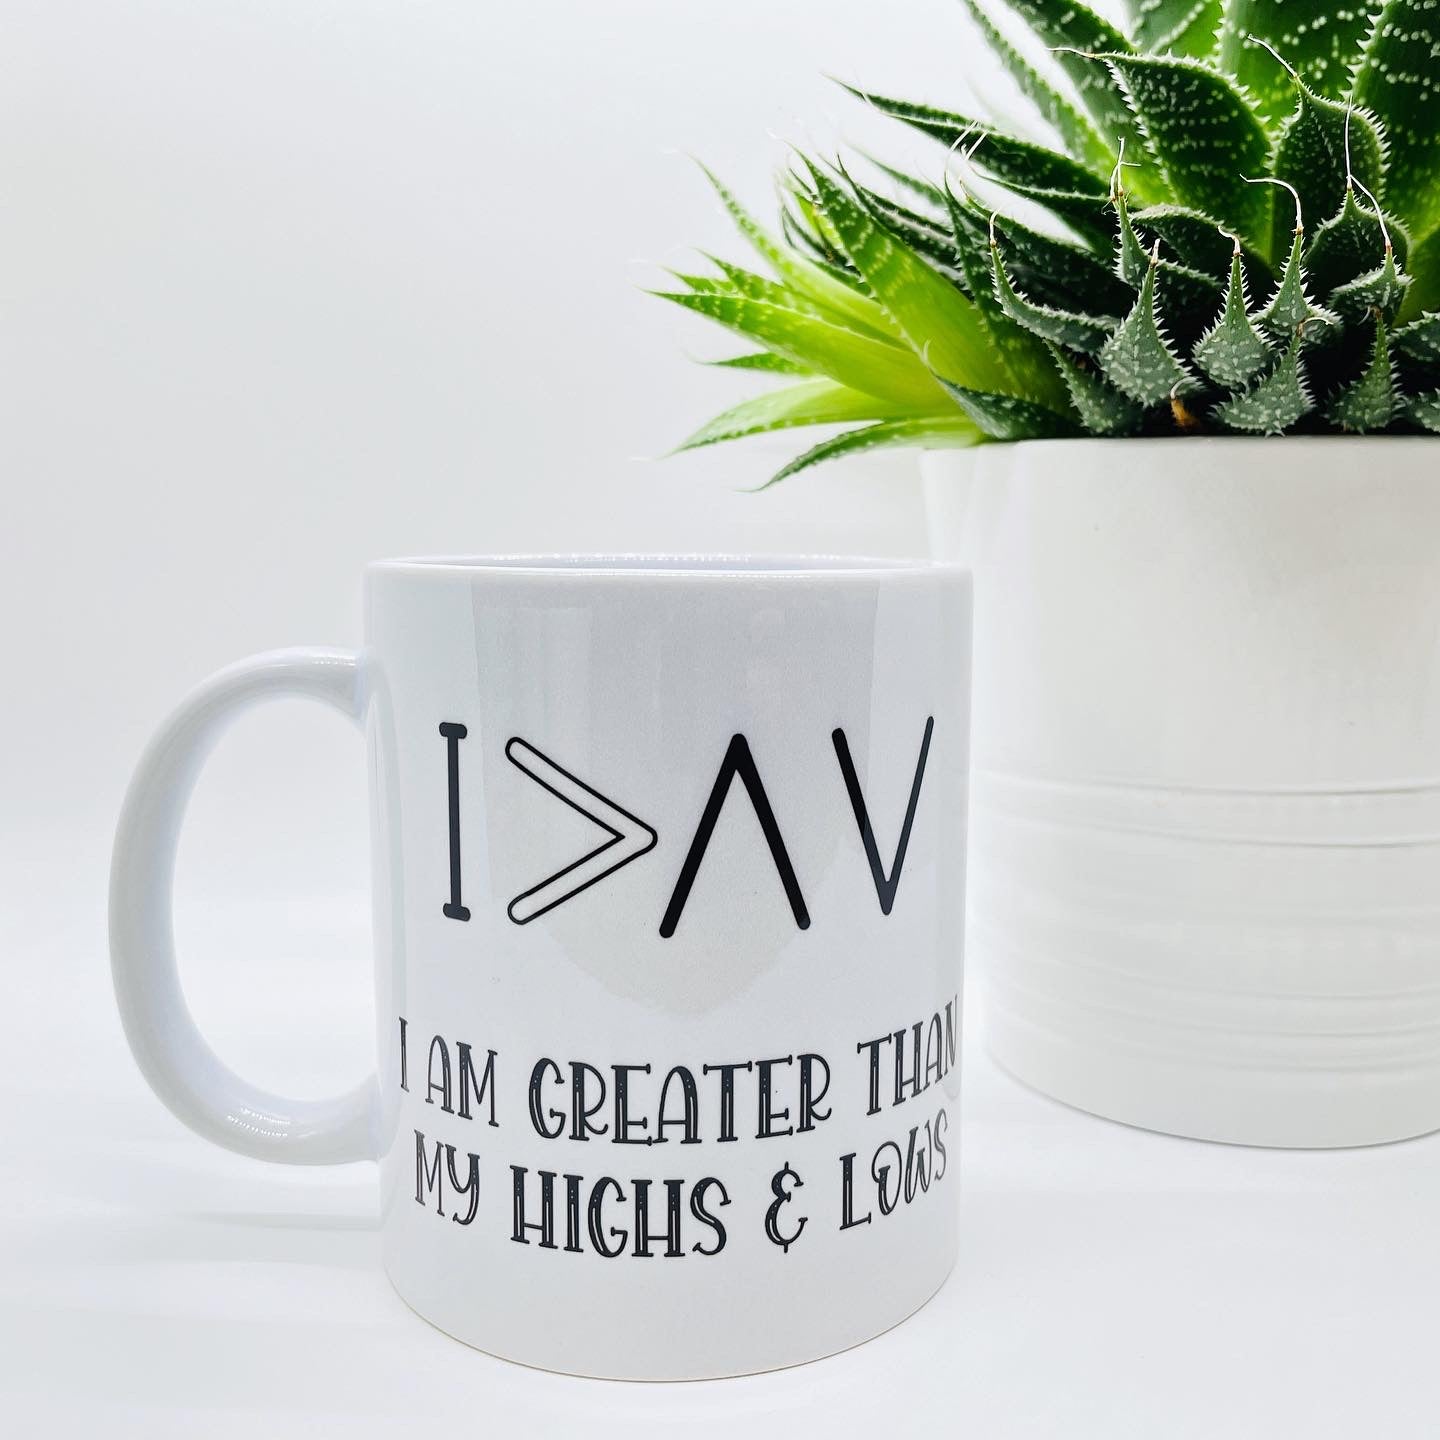 I Am Greater Than My Highs & Lows Mug/Cup